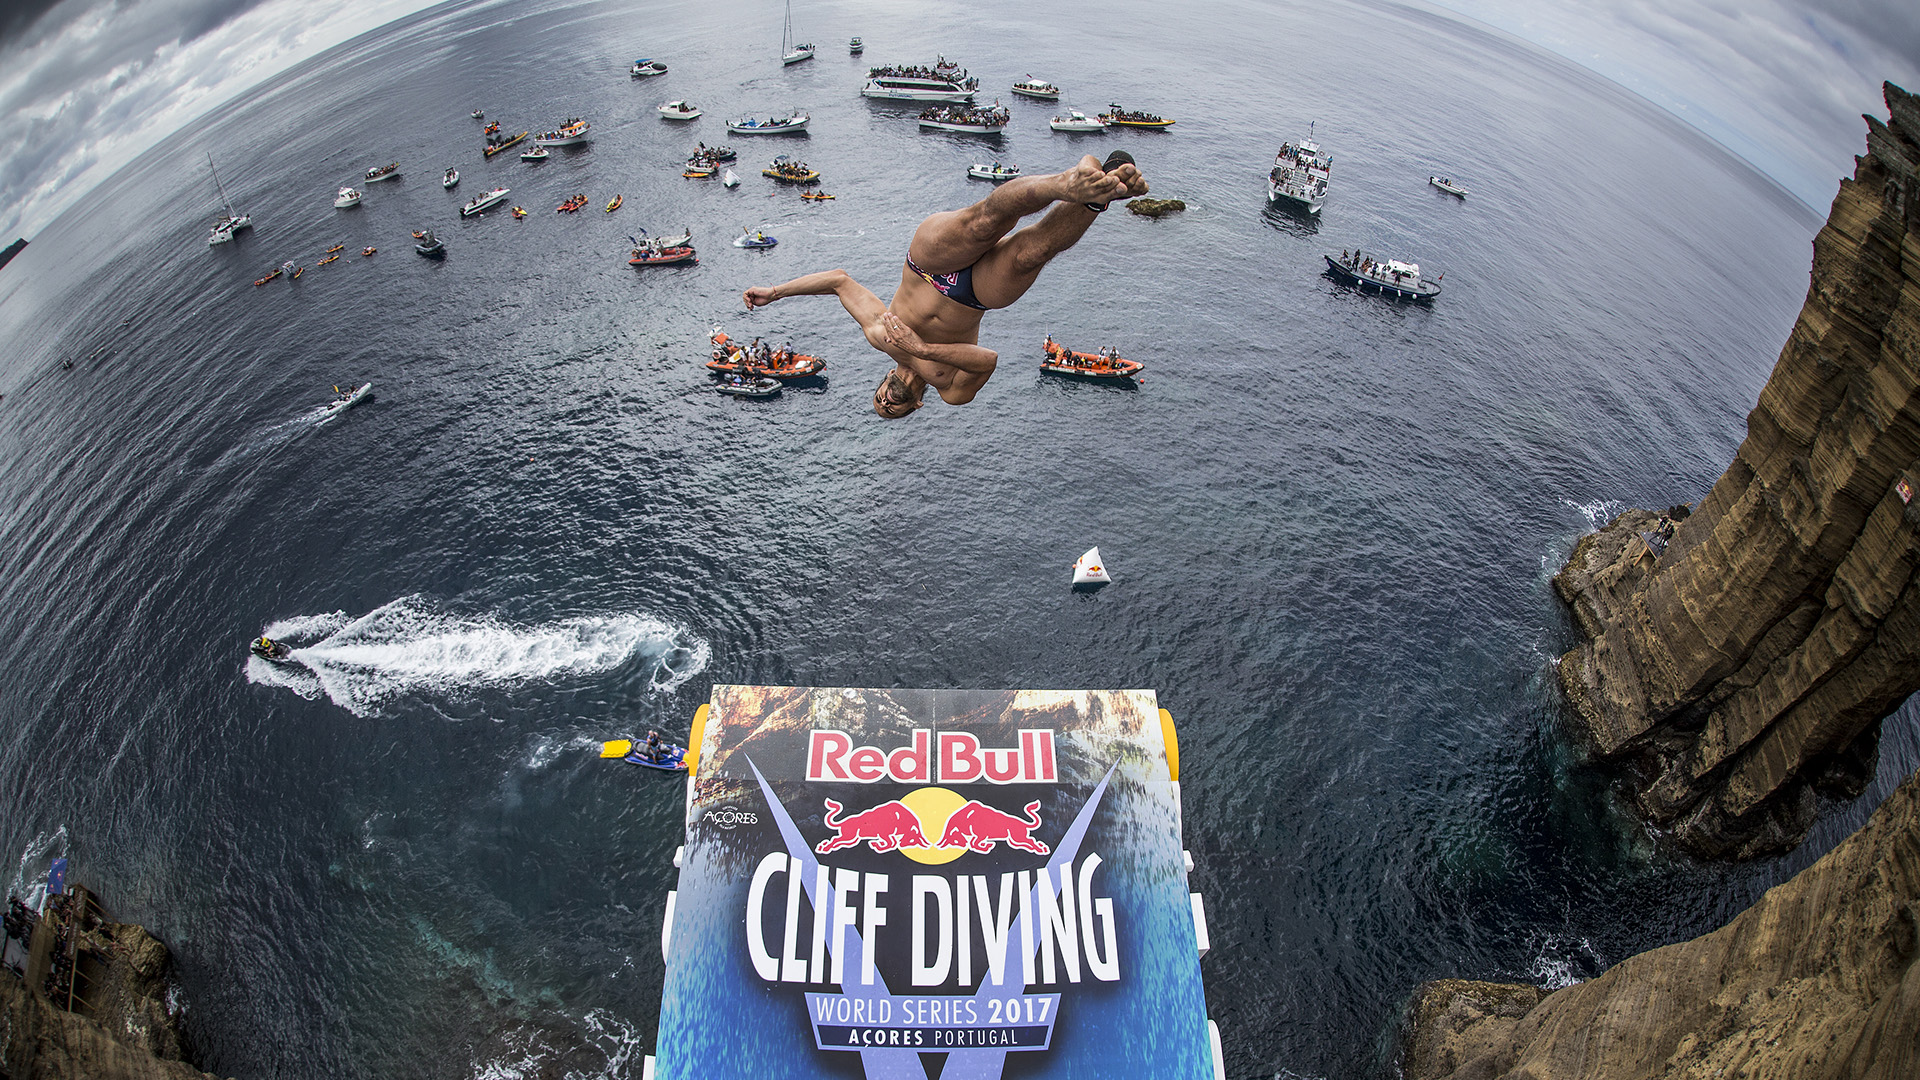 RED BULL CLIFF DIVING - Extreme Events & Services